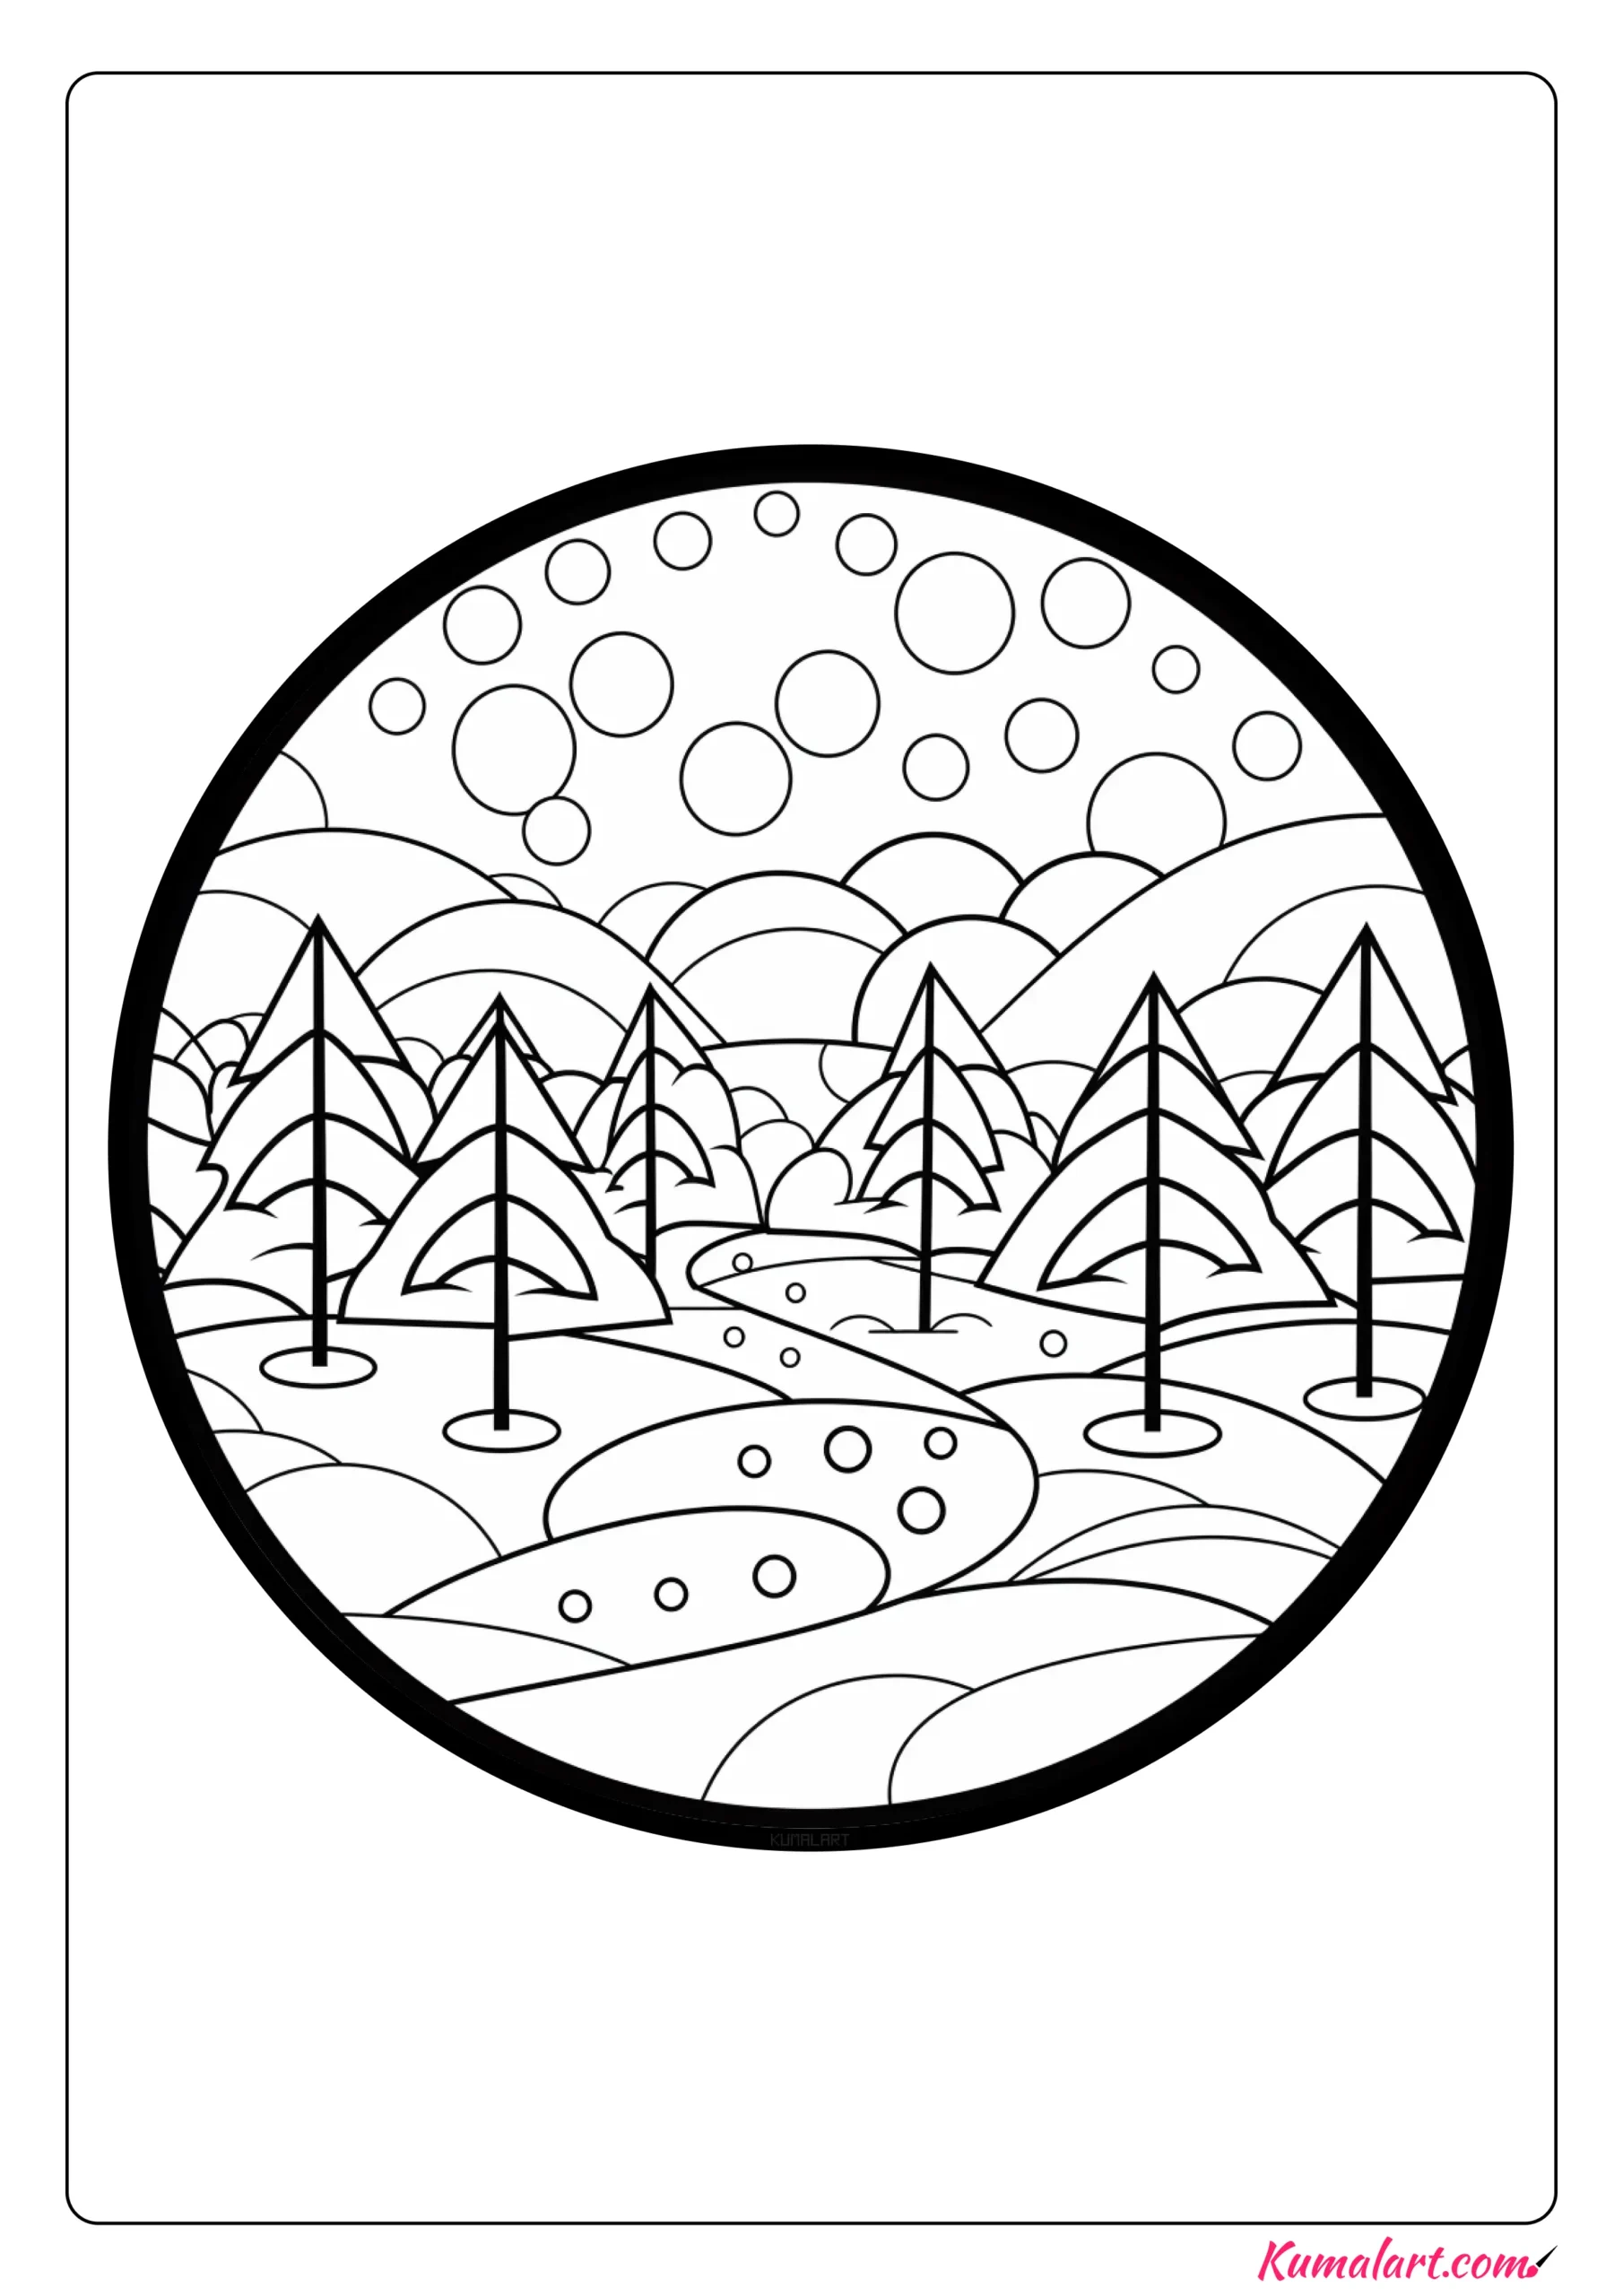 Wintry Winter Mandala Coloring Page